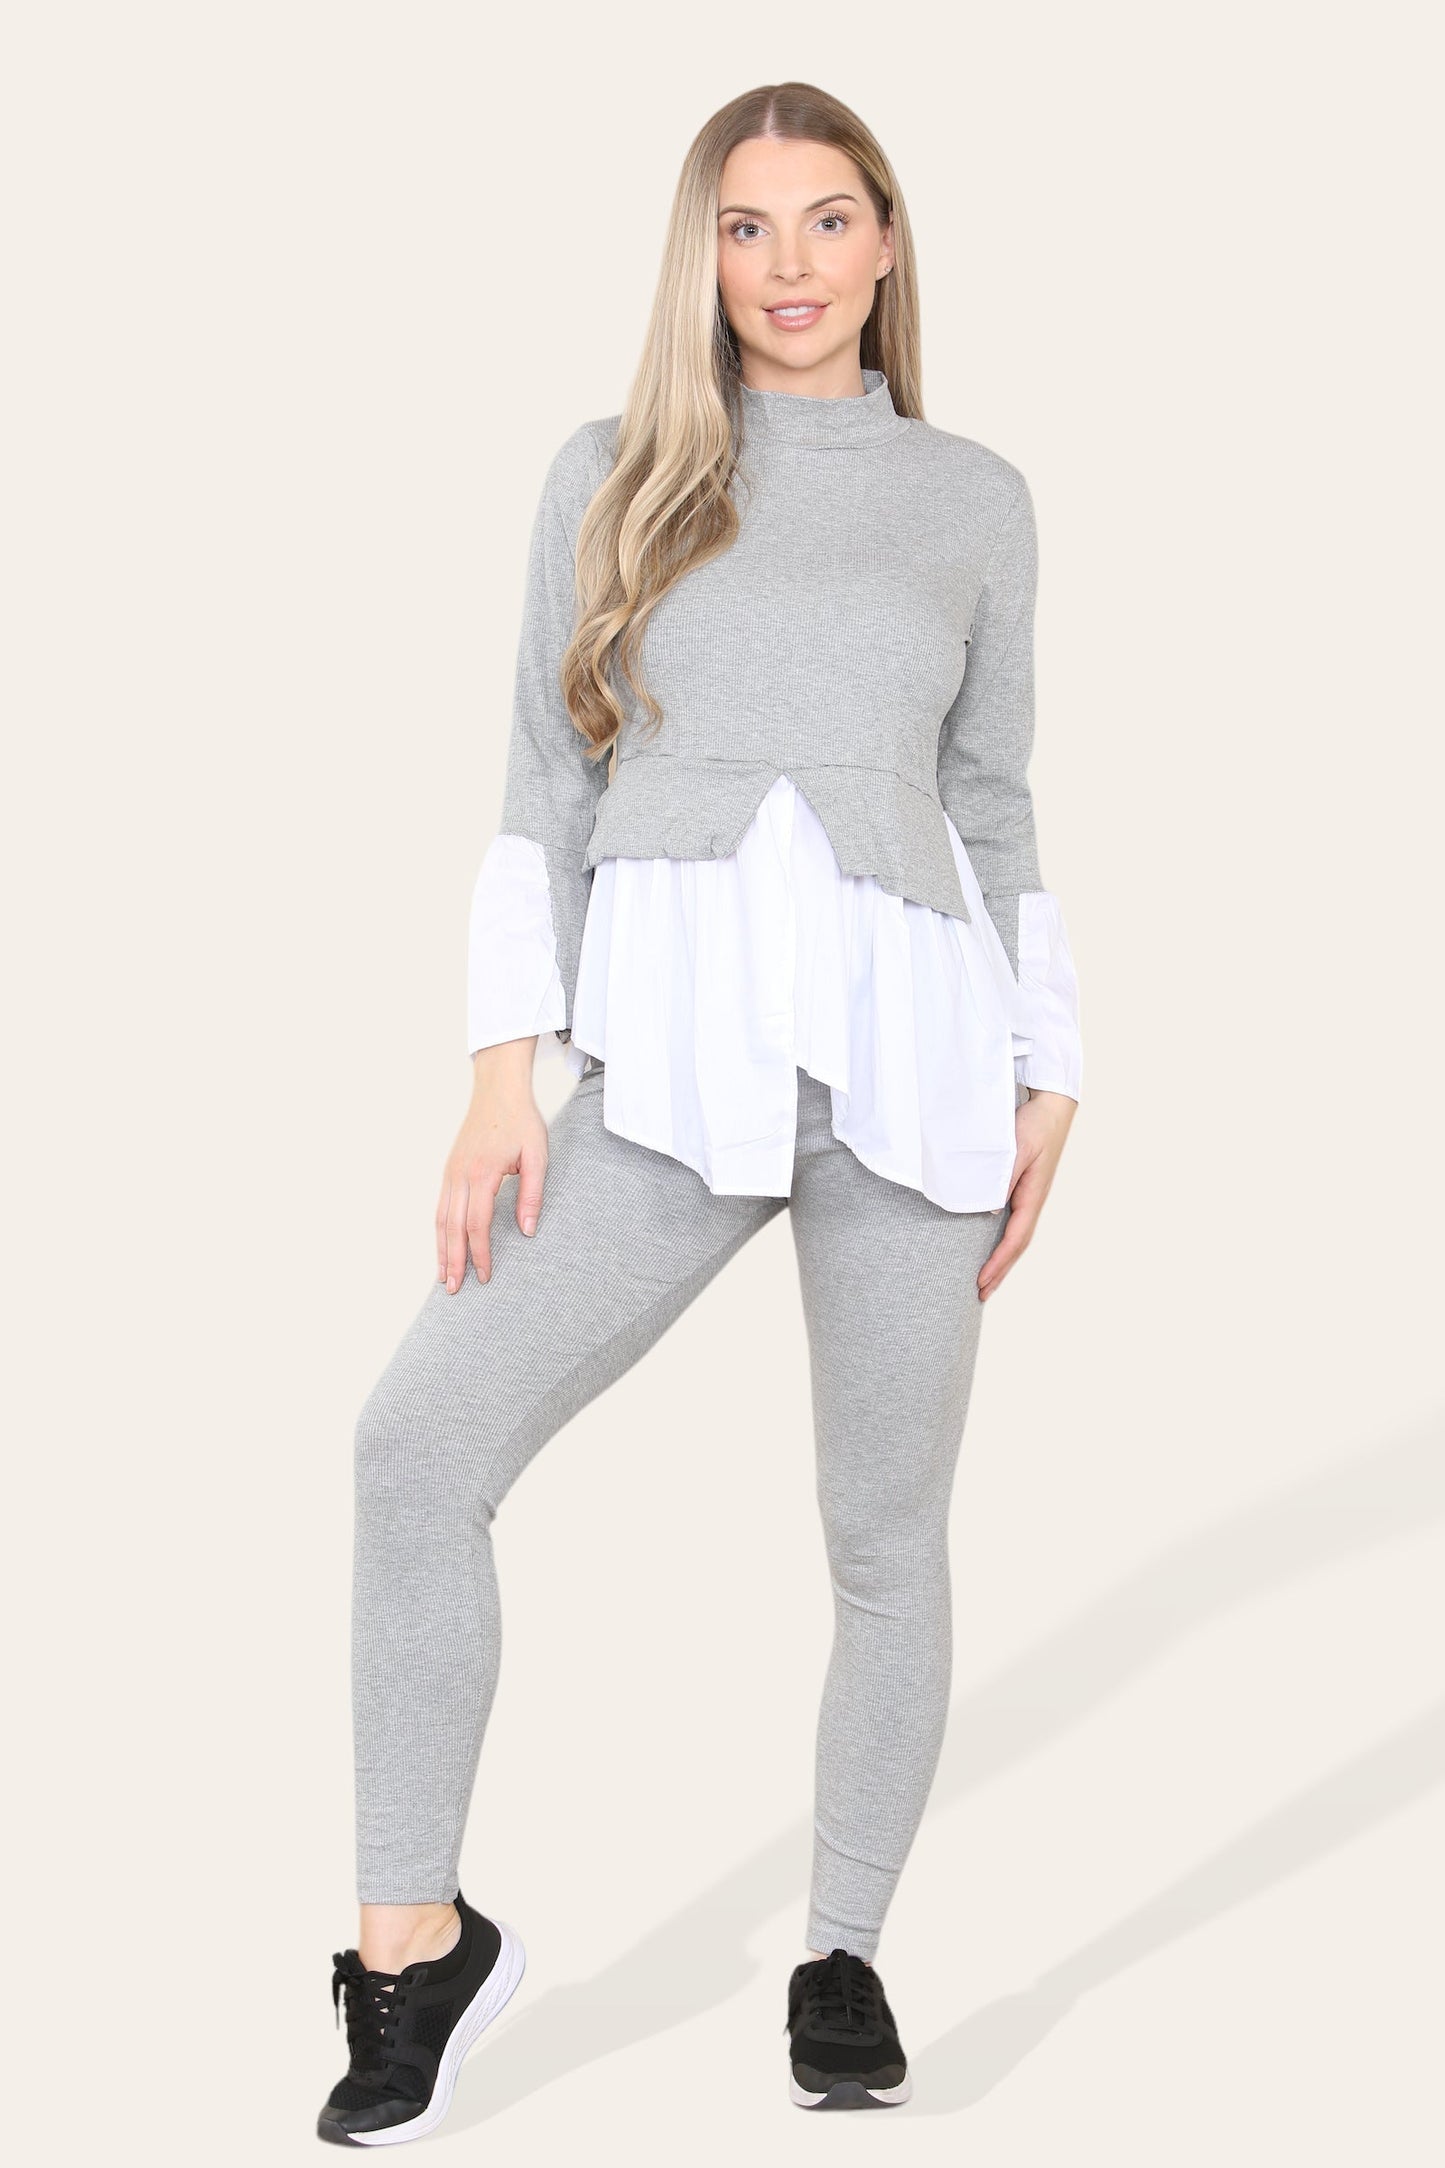 Ribbed Lounge Wear Flared Shirt and Leggings Co-Ord Set - Multi Trends